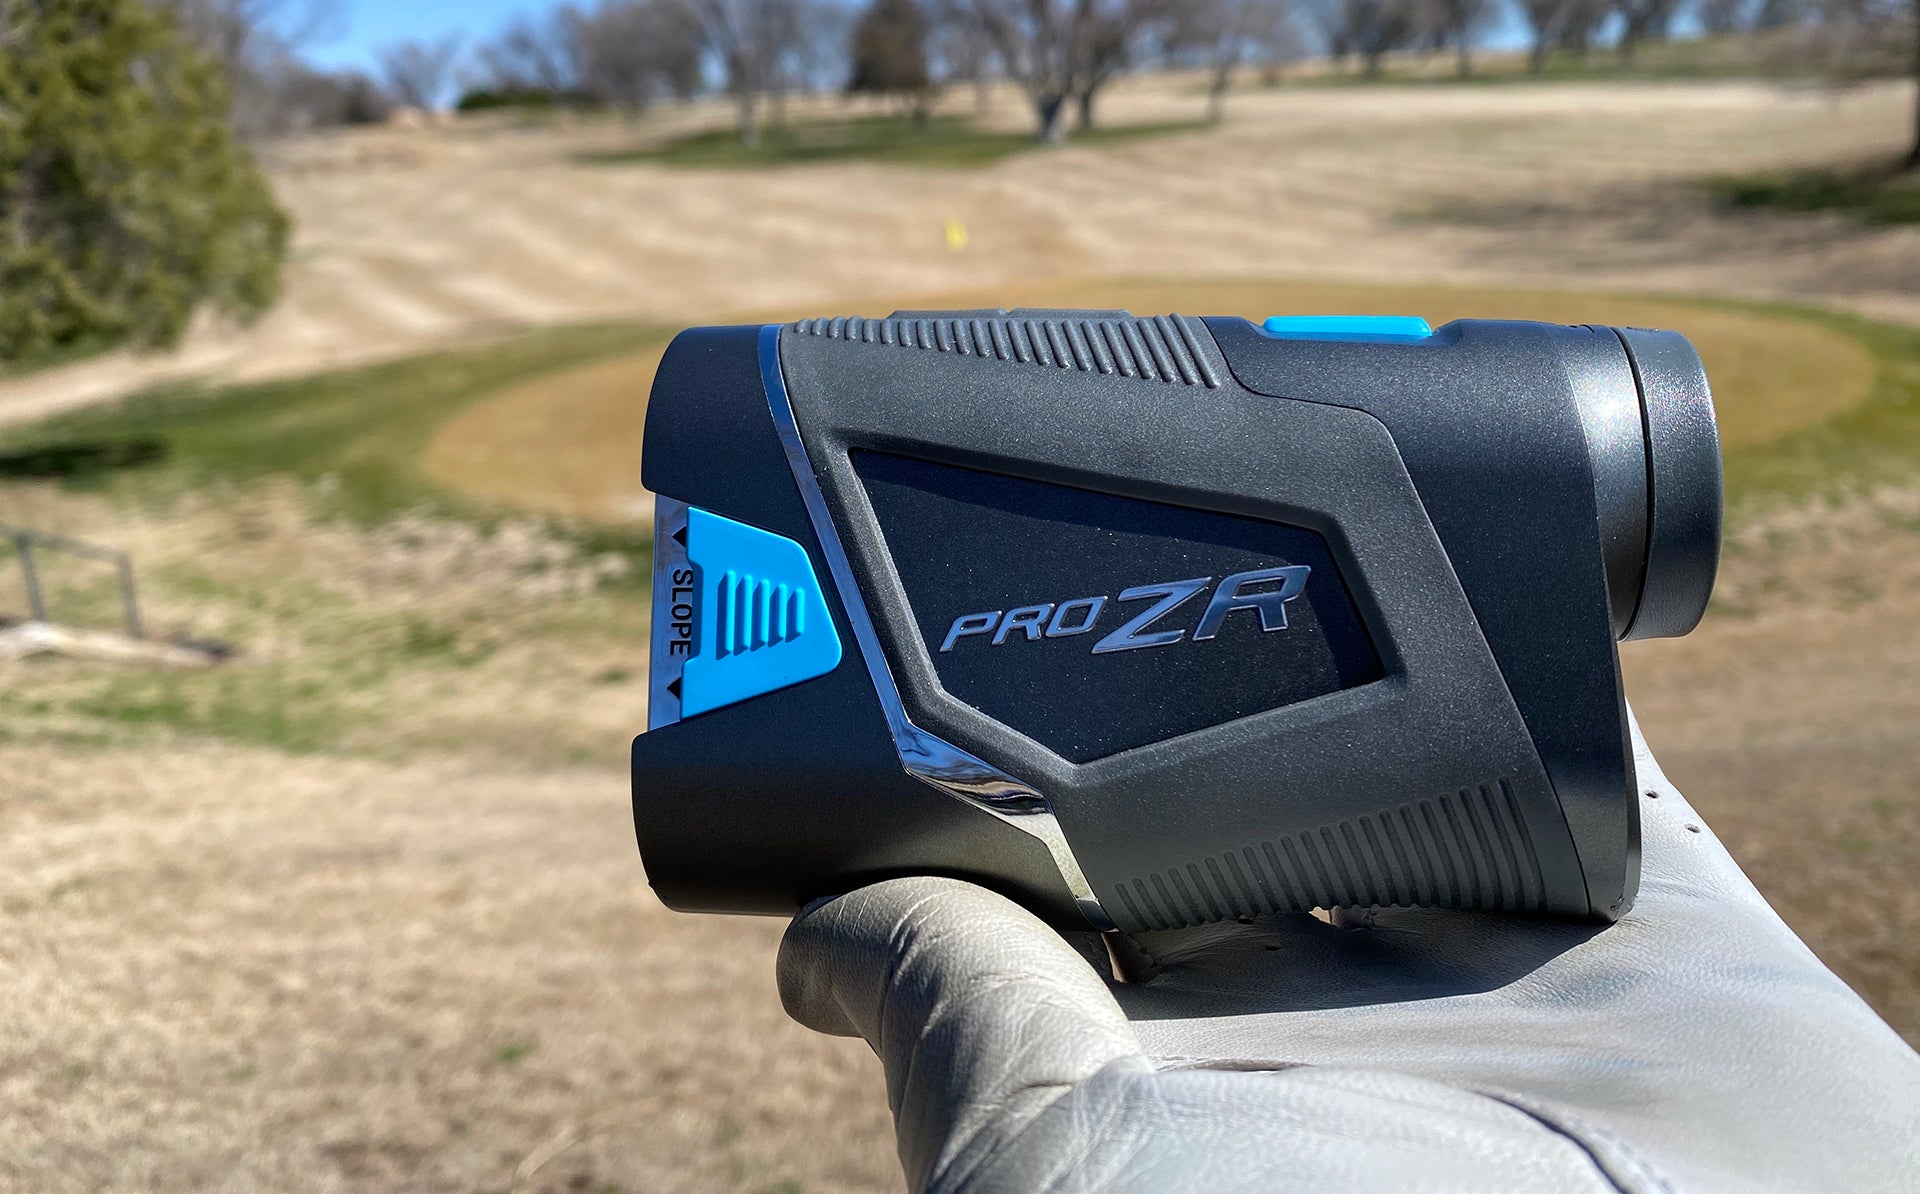 The Shot Scope PRO ZR golf rangefinder in a golf-gloved hand held up against a golf course in the background